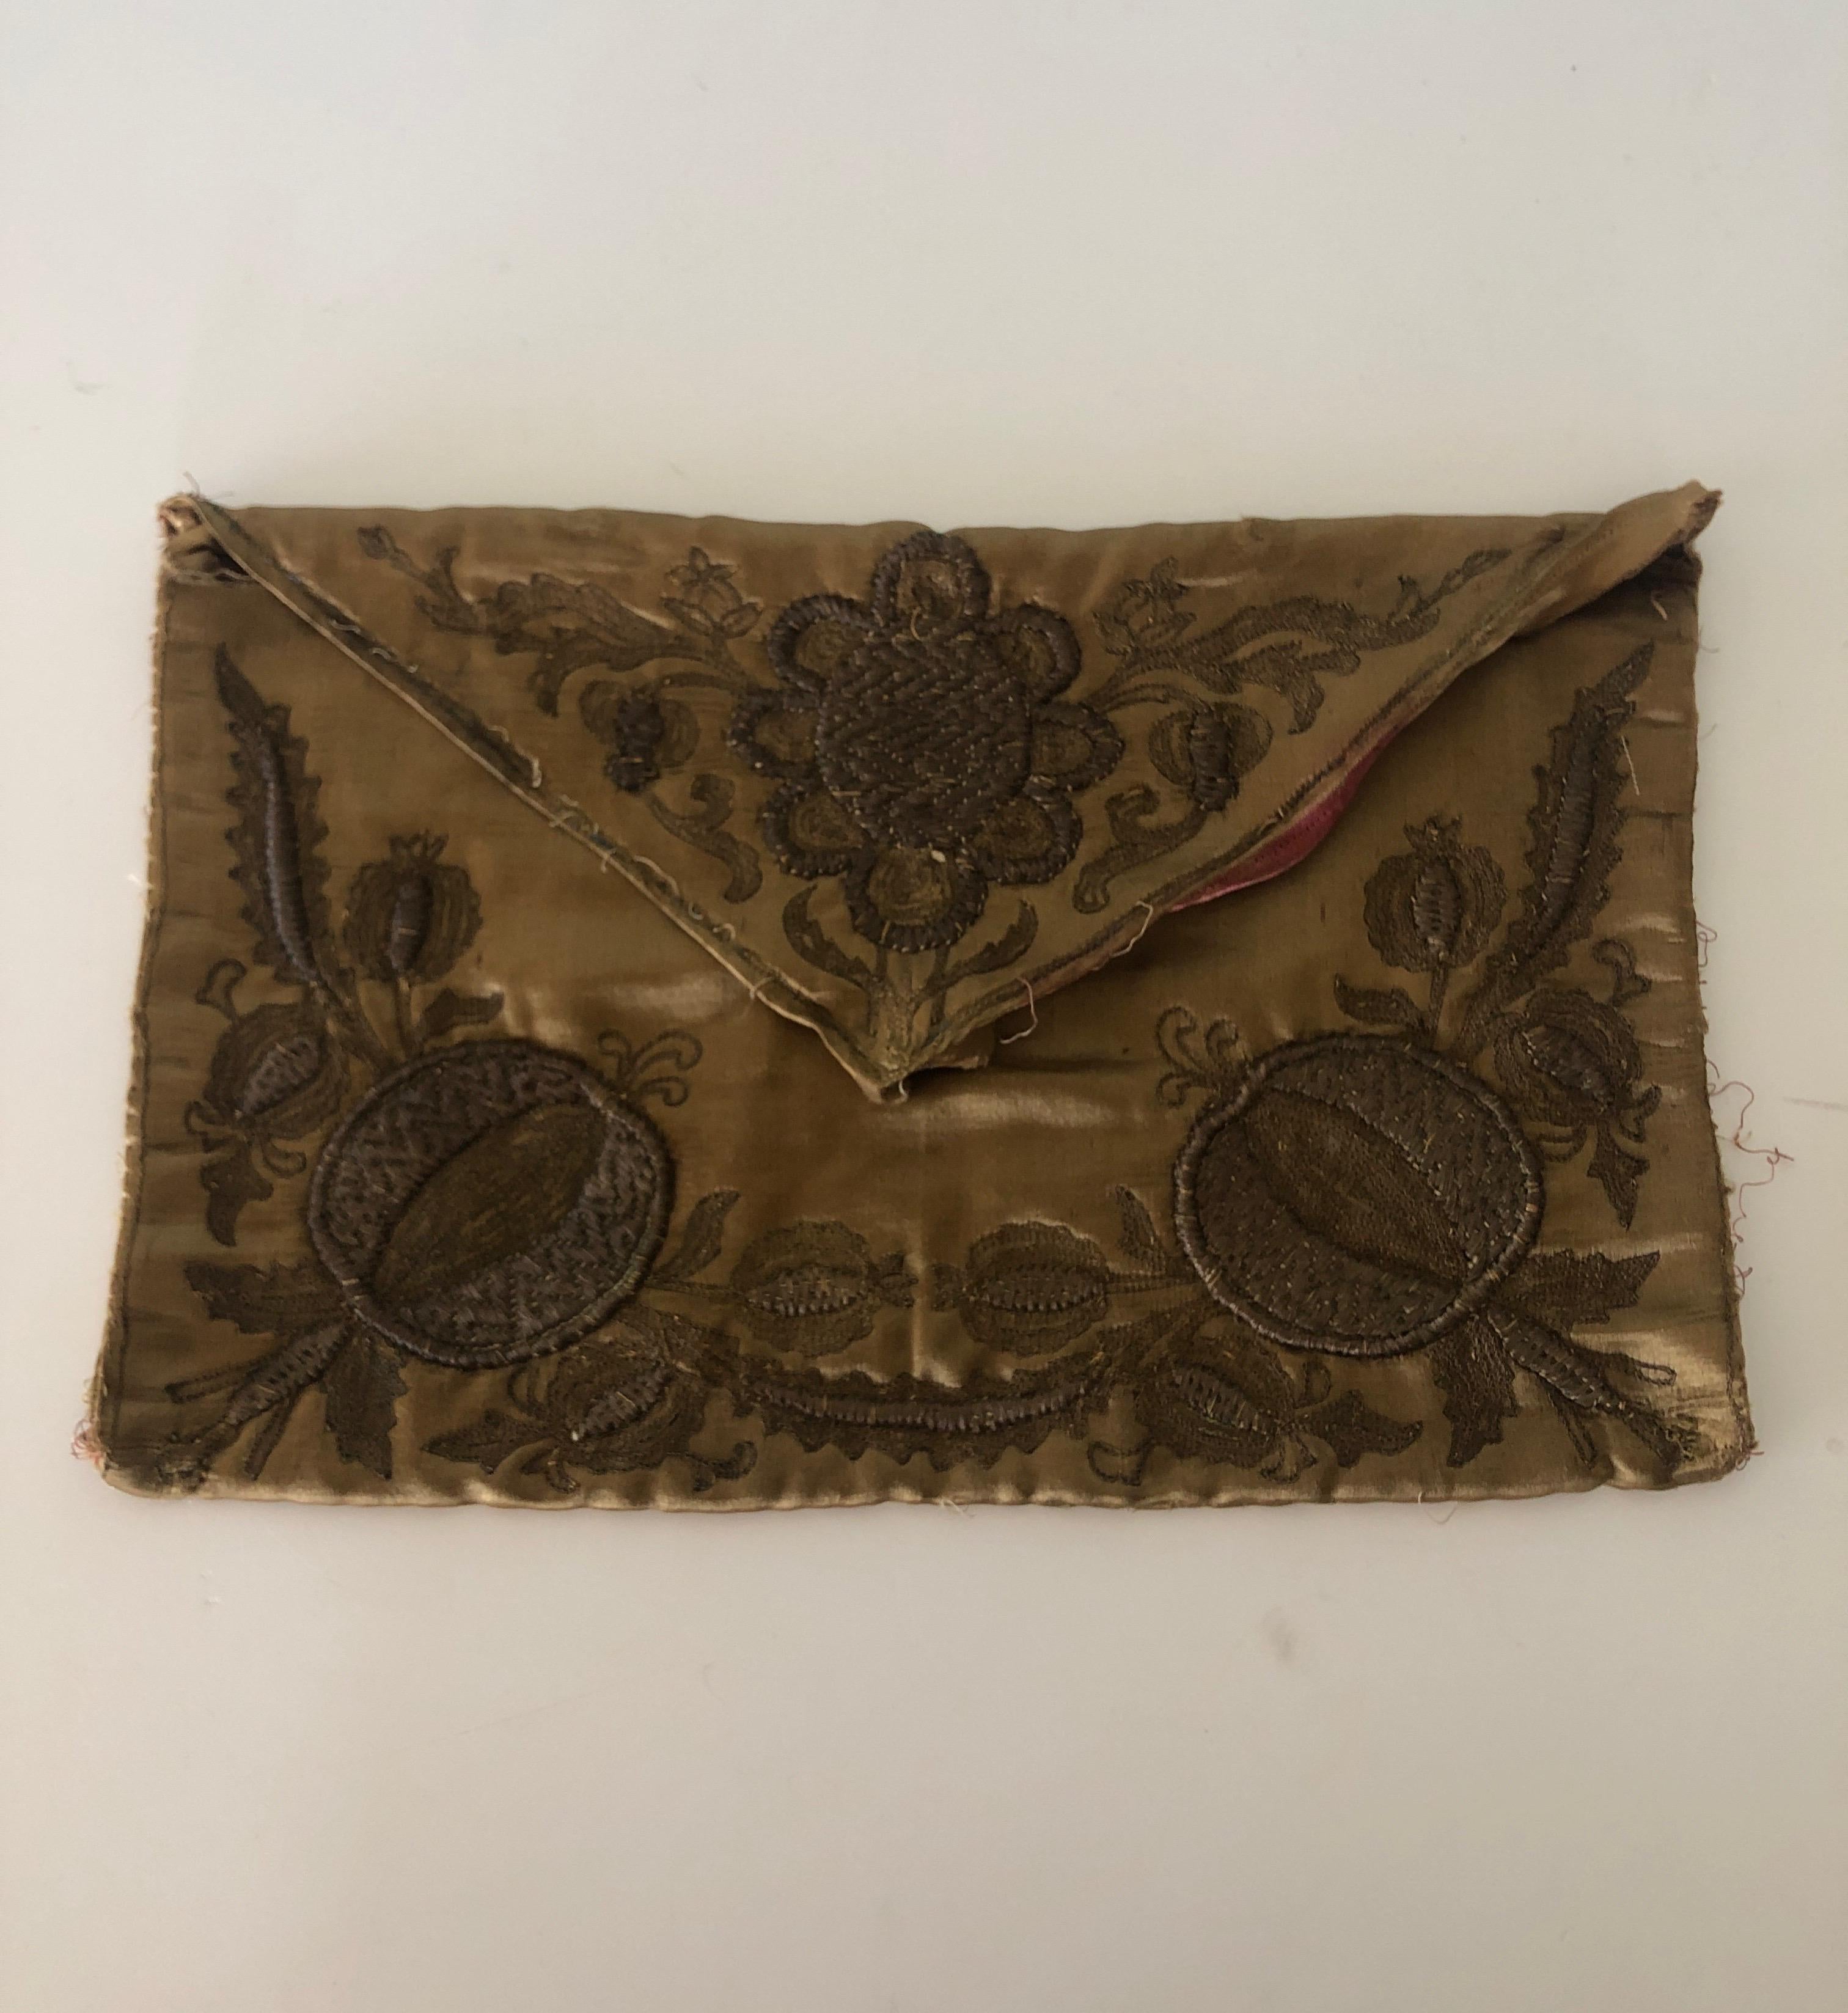 Antique gold silk and metallic threads embroidery textile.
Originally a bag, ideal for a pillow or to frame in a shadow box.
Size closed: 9